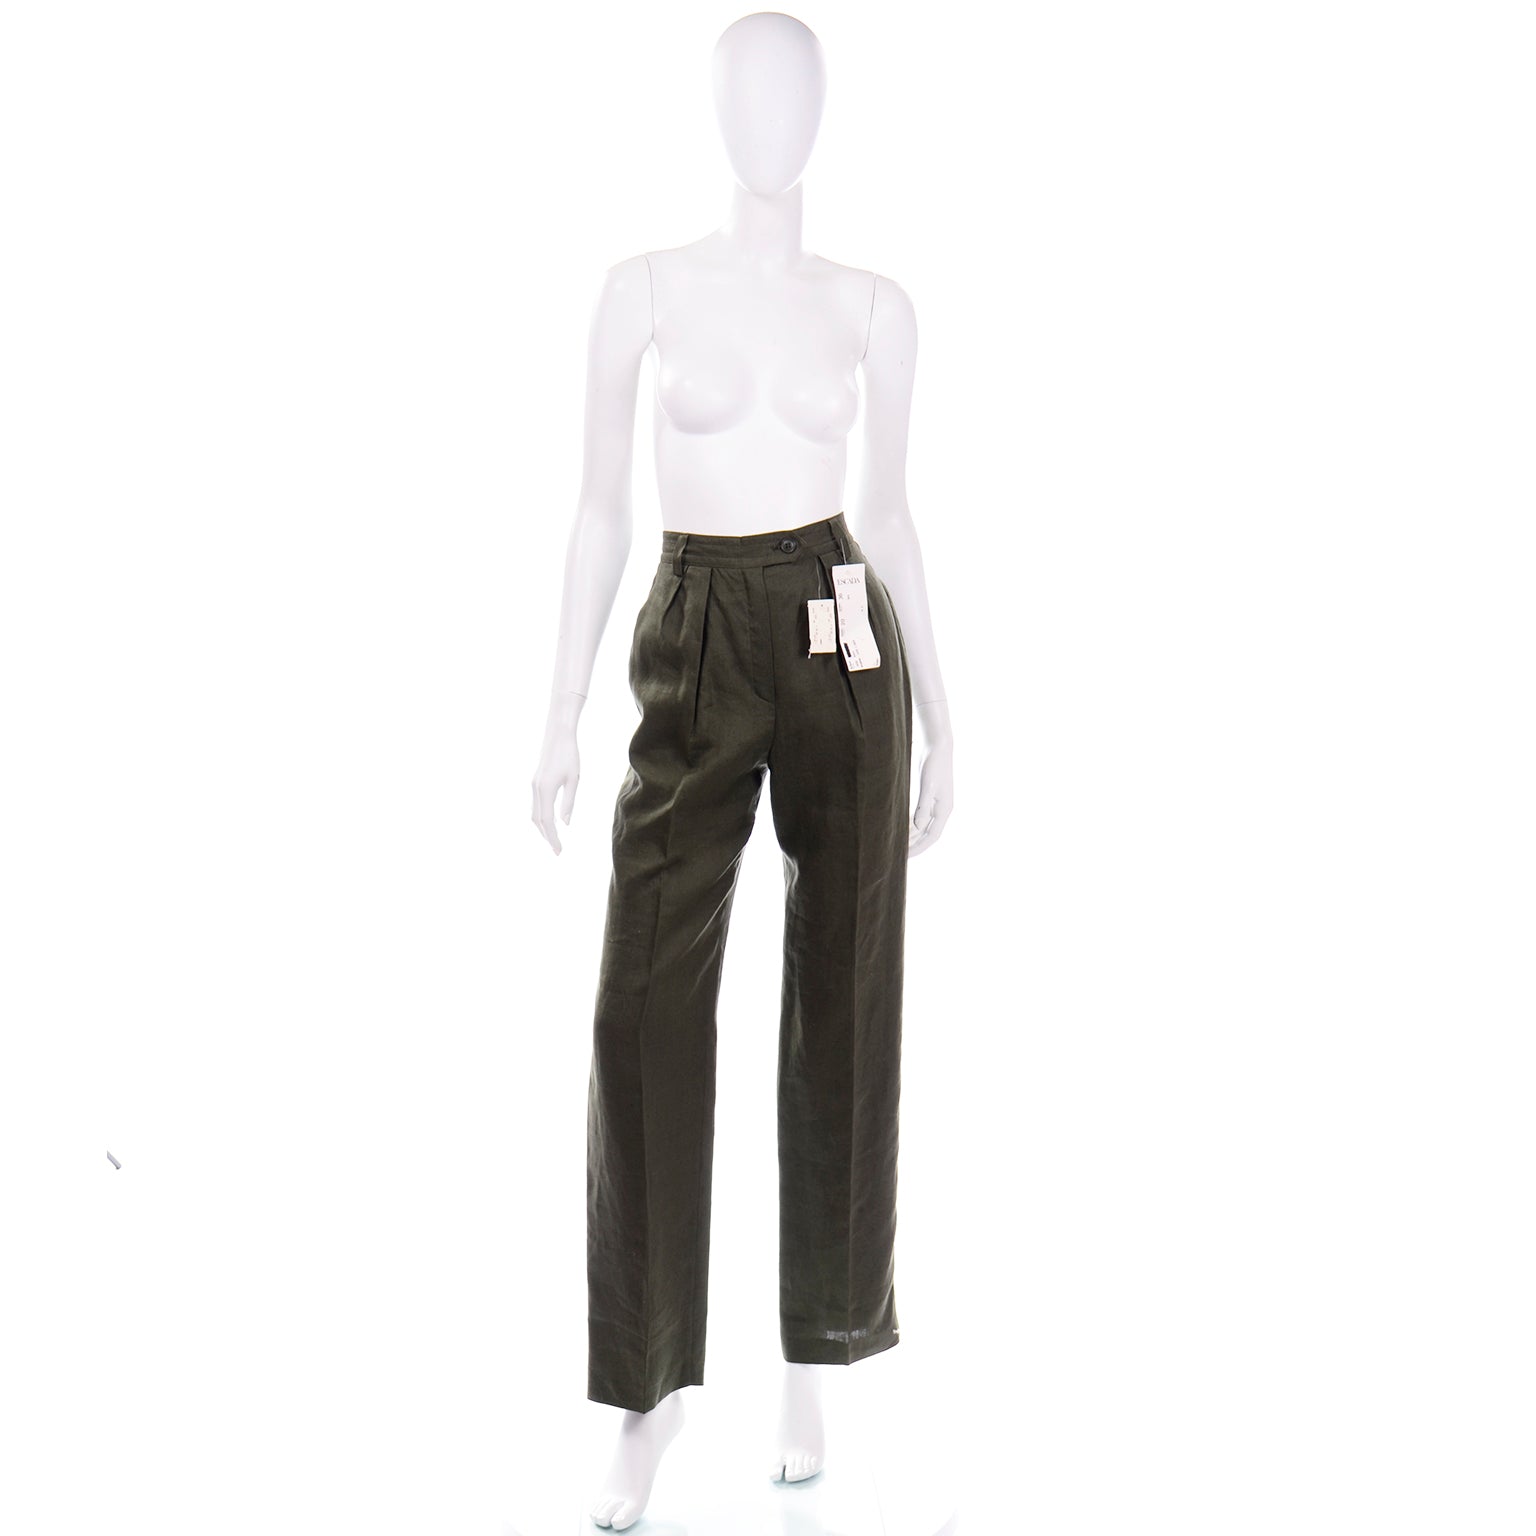 Vintage ESCADA Pants // Vintage Tapered Trousers by Margaretha Ley